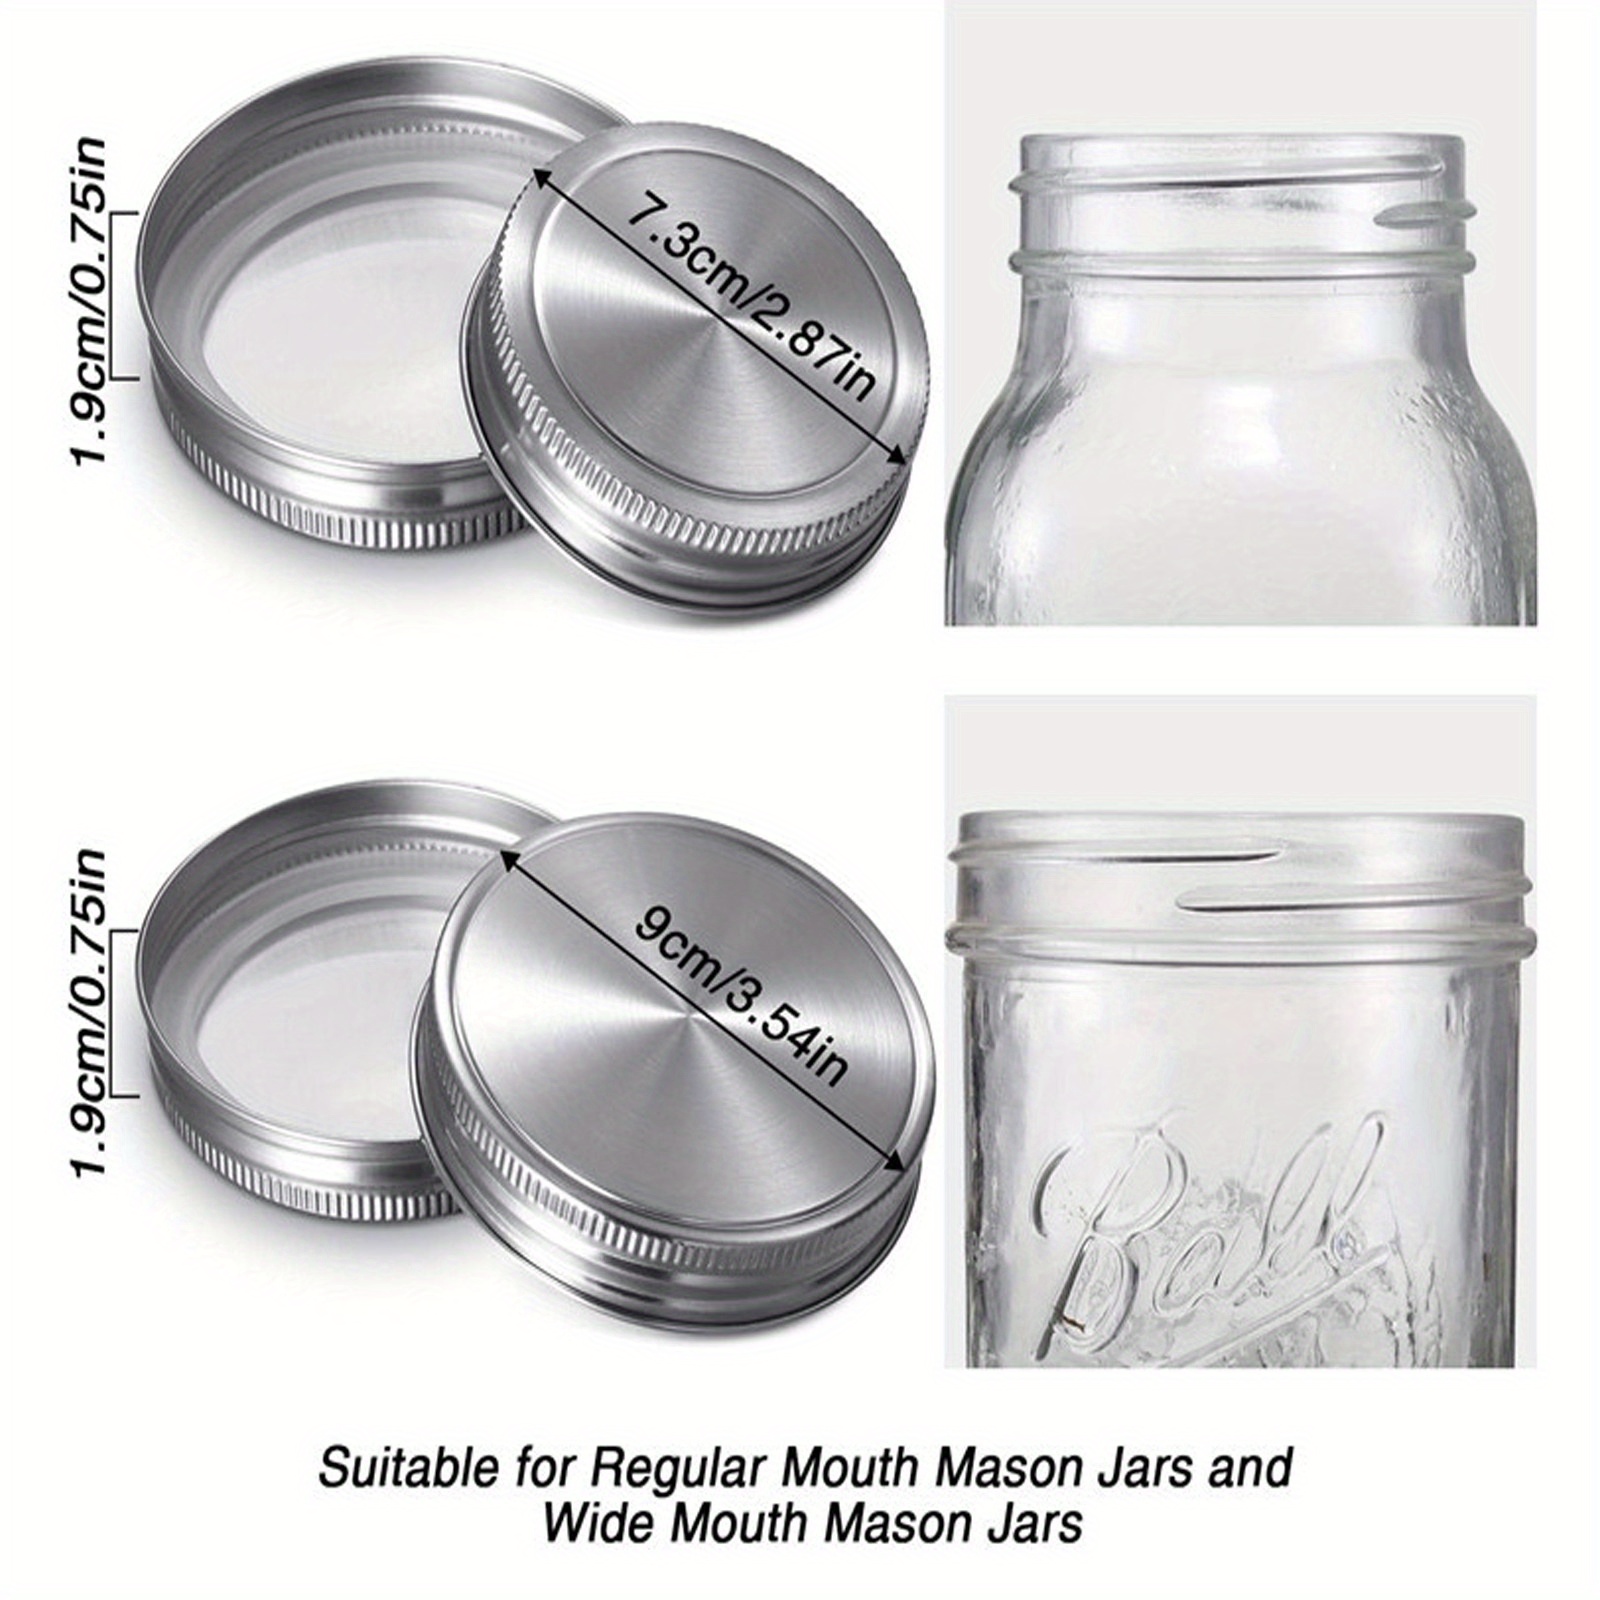 Aozita 12 Piece Colored Plastic Mason Jar Lids for Ball and More - 6 Regular Mouth & 6 Wide Mouth - Plastic Storage Caps for Mason